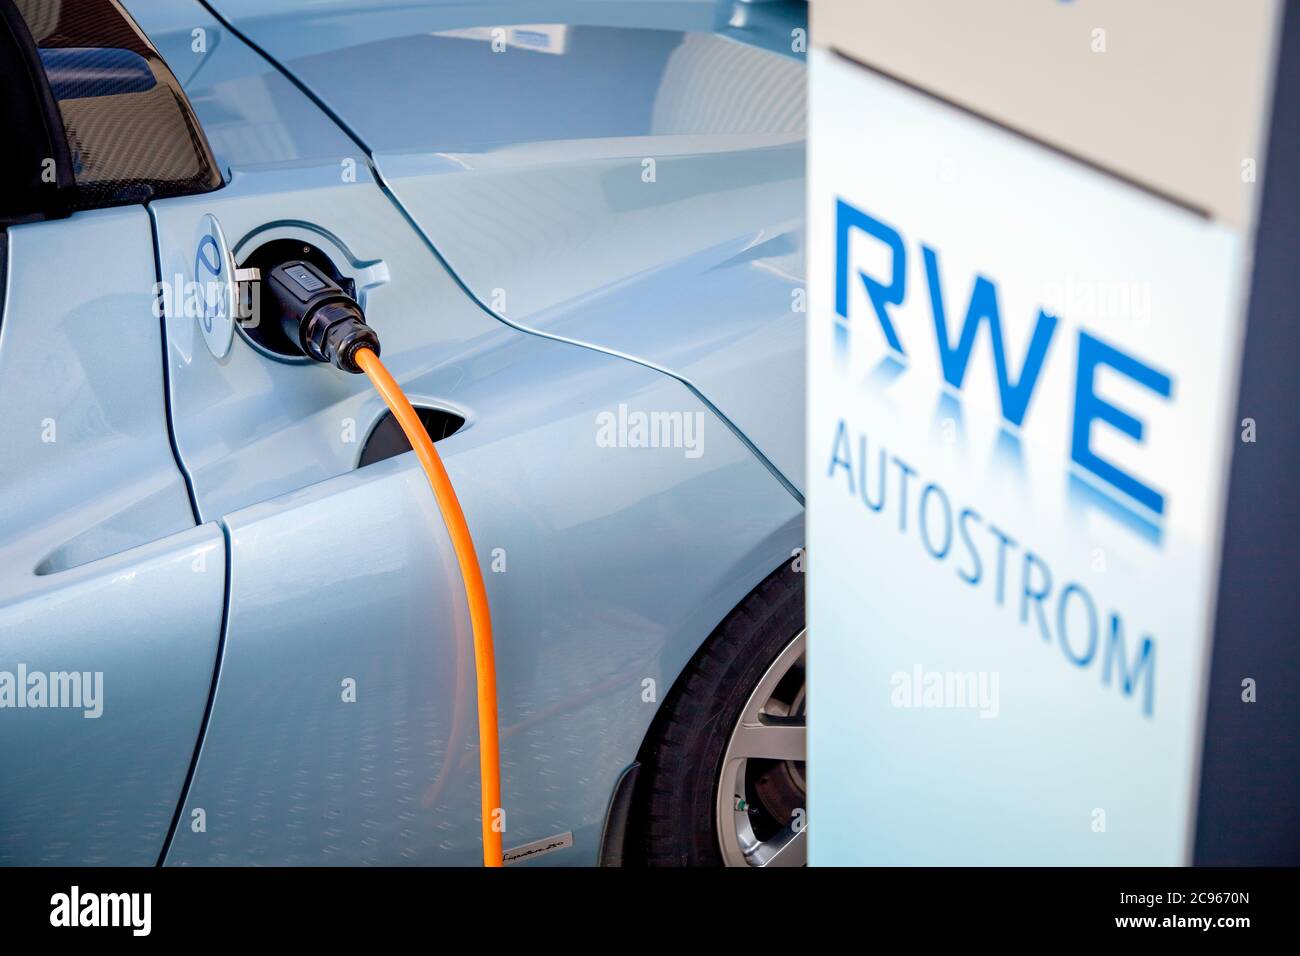 https://c8.alamy.com/comp/2C9670N/essen-north-rhine-westphalia-germany-an-electric-car-tesla-roadster-in-the-brabus-edition-will-be-charged-at-an-rwe-fast-charging-station-at-the-2C9670N.jpg